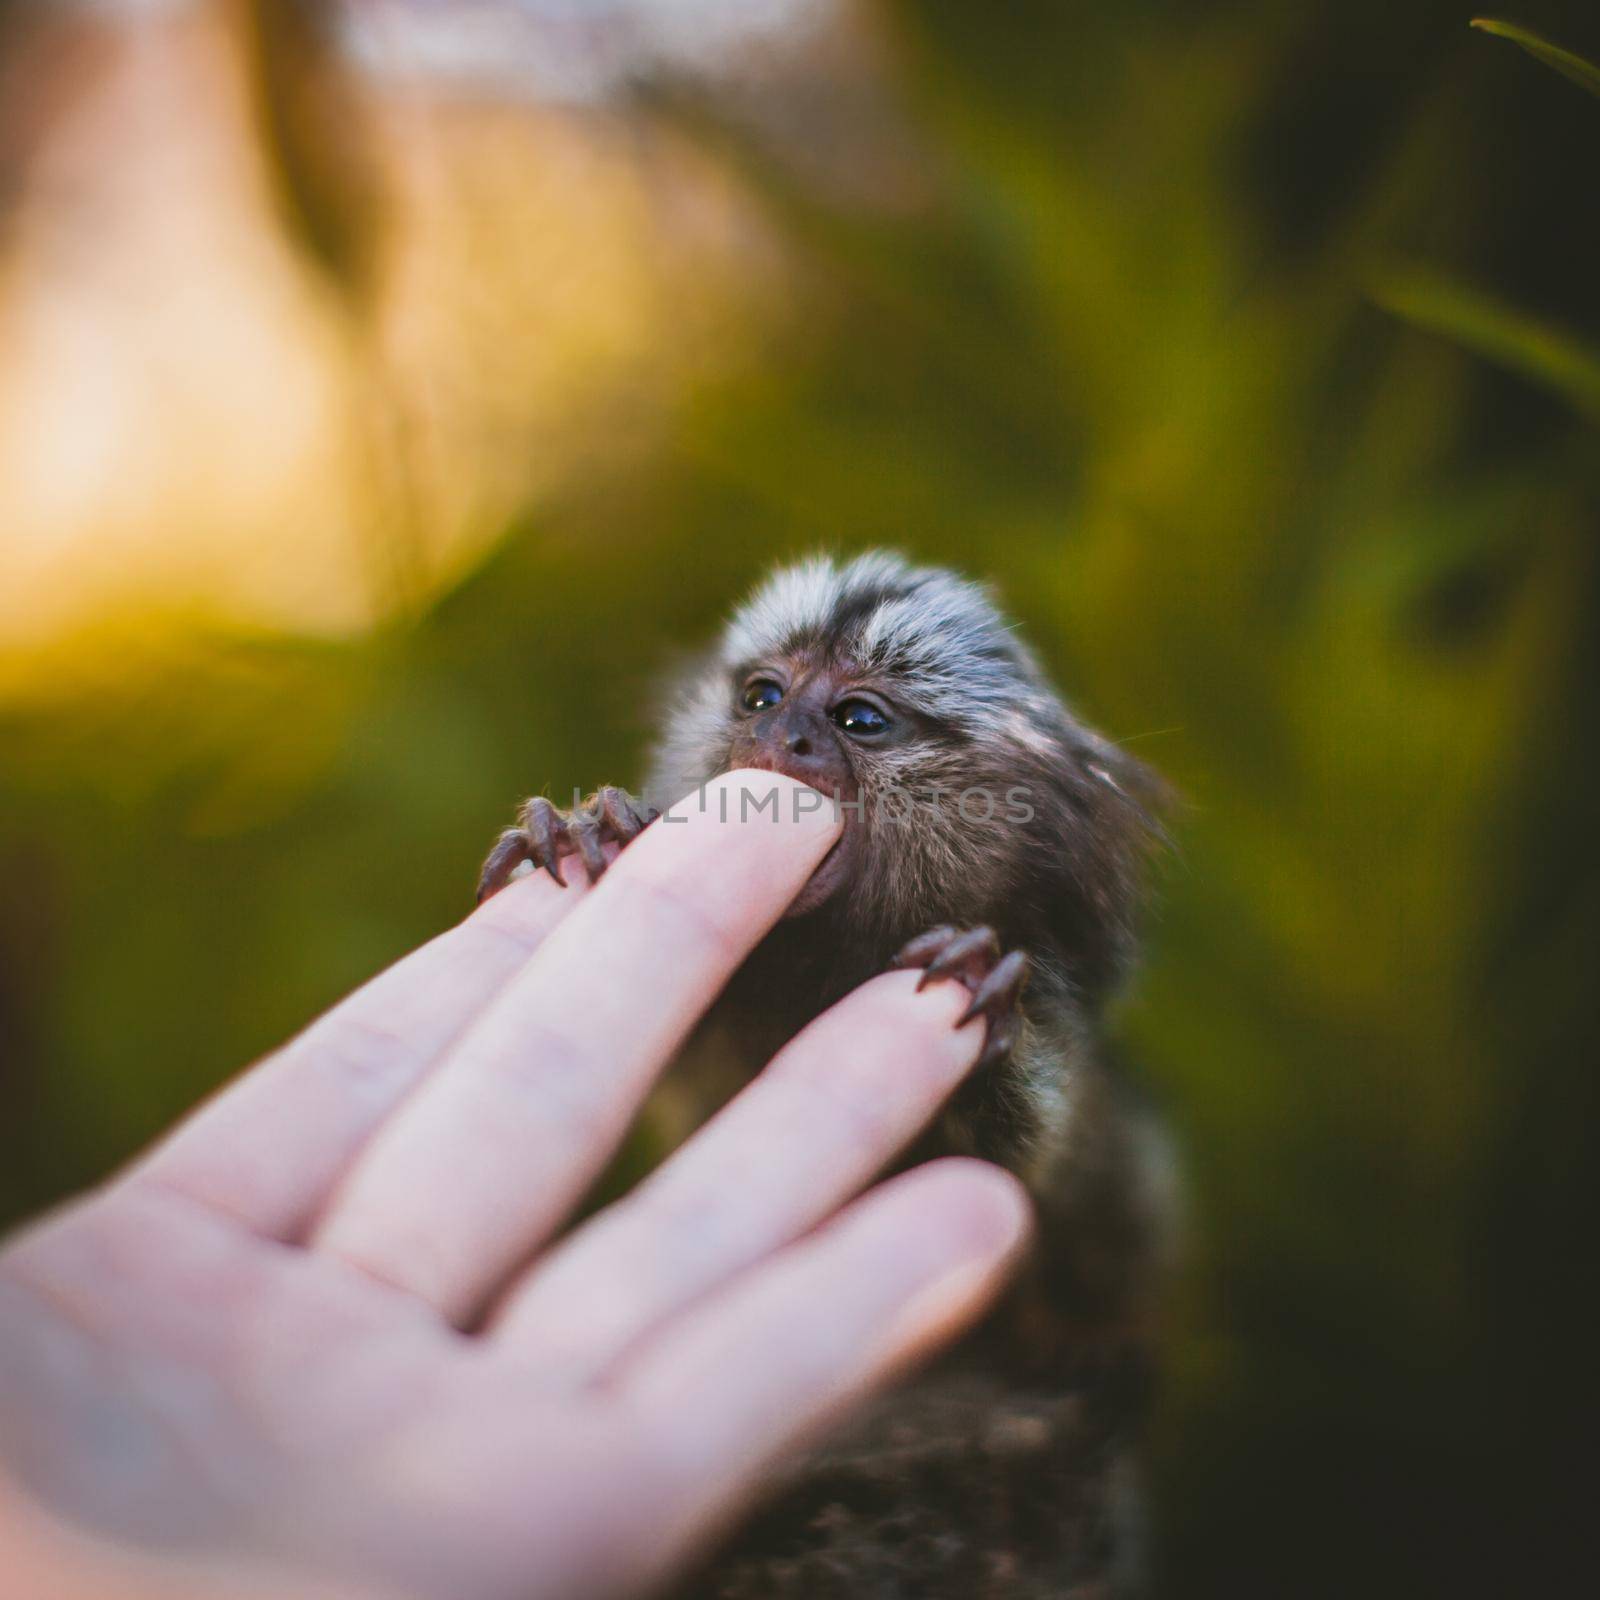 The common marmoset baby on the branch in summer garden with humsn hand by RosaJay